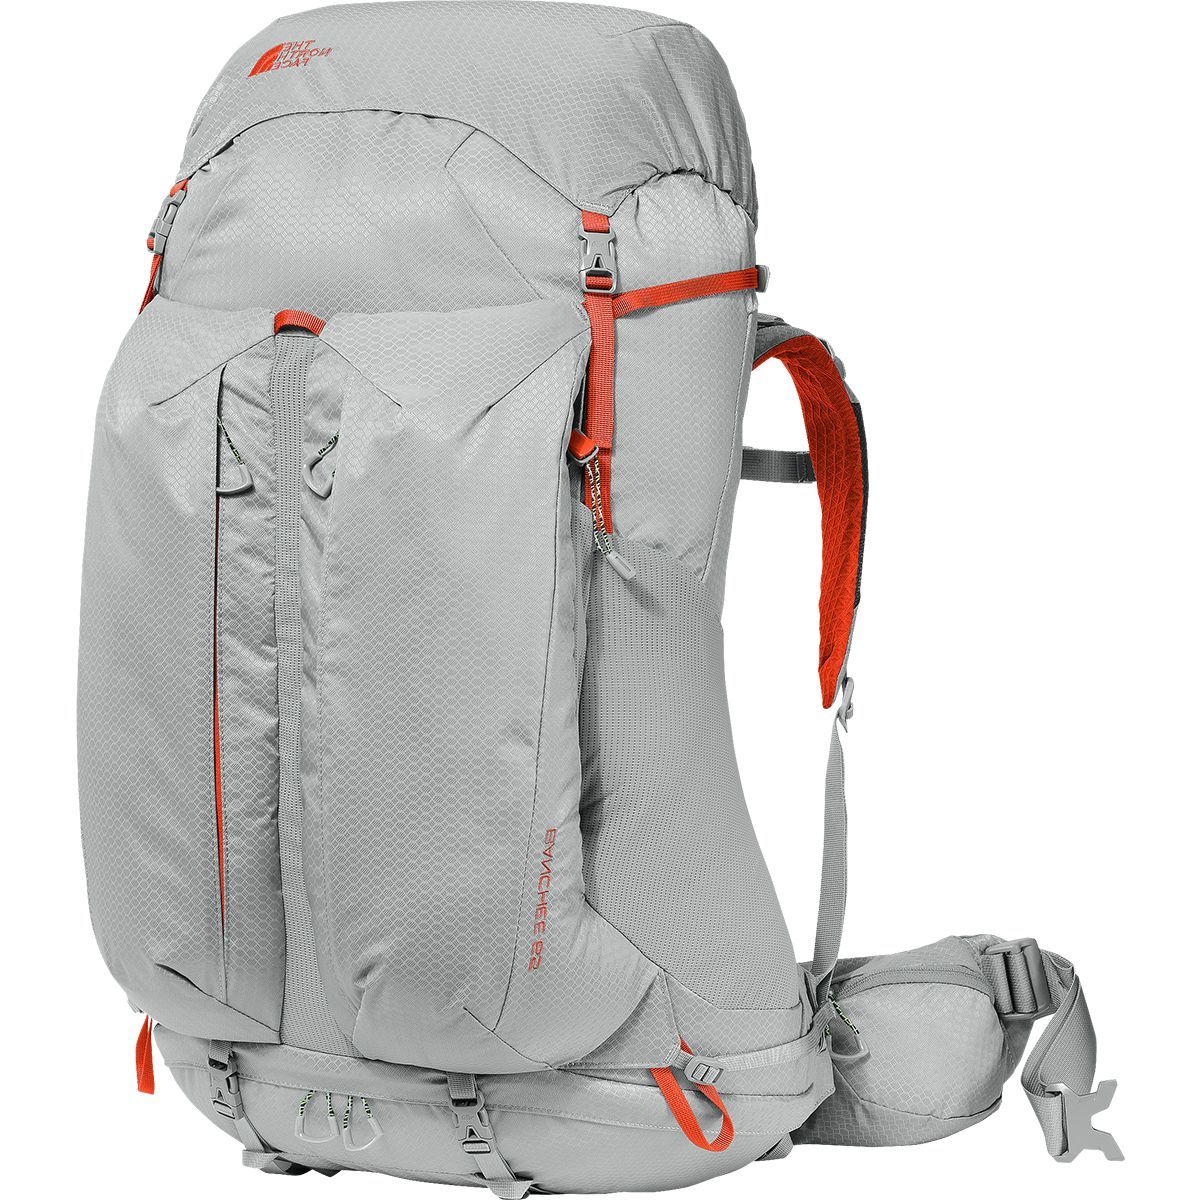 The North Face Banchee 65L Backpack - Women's